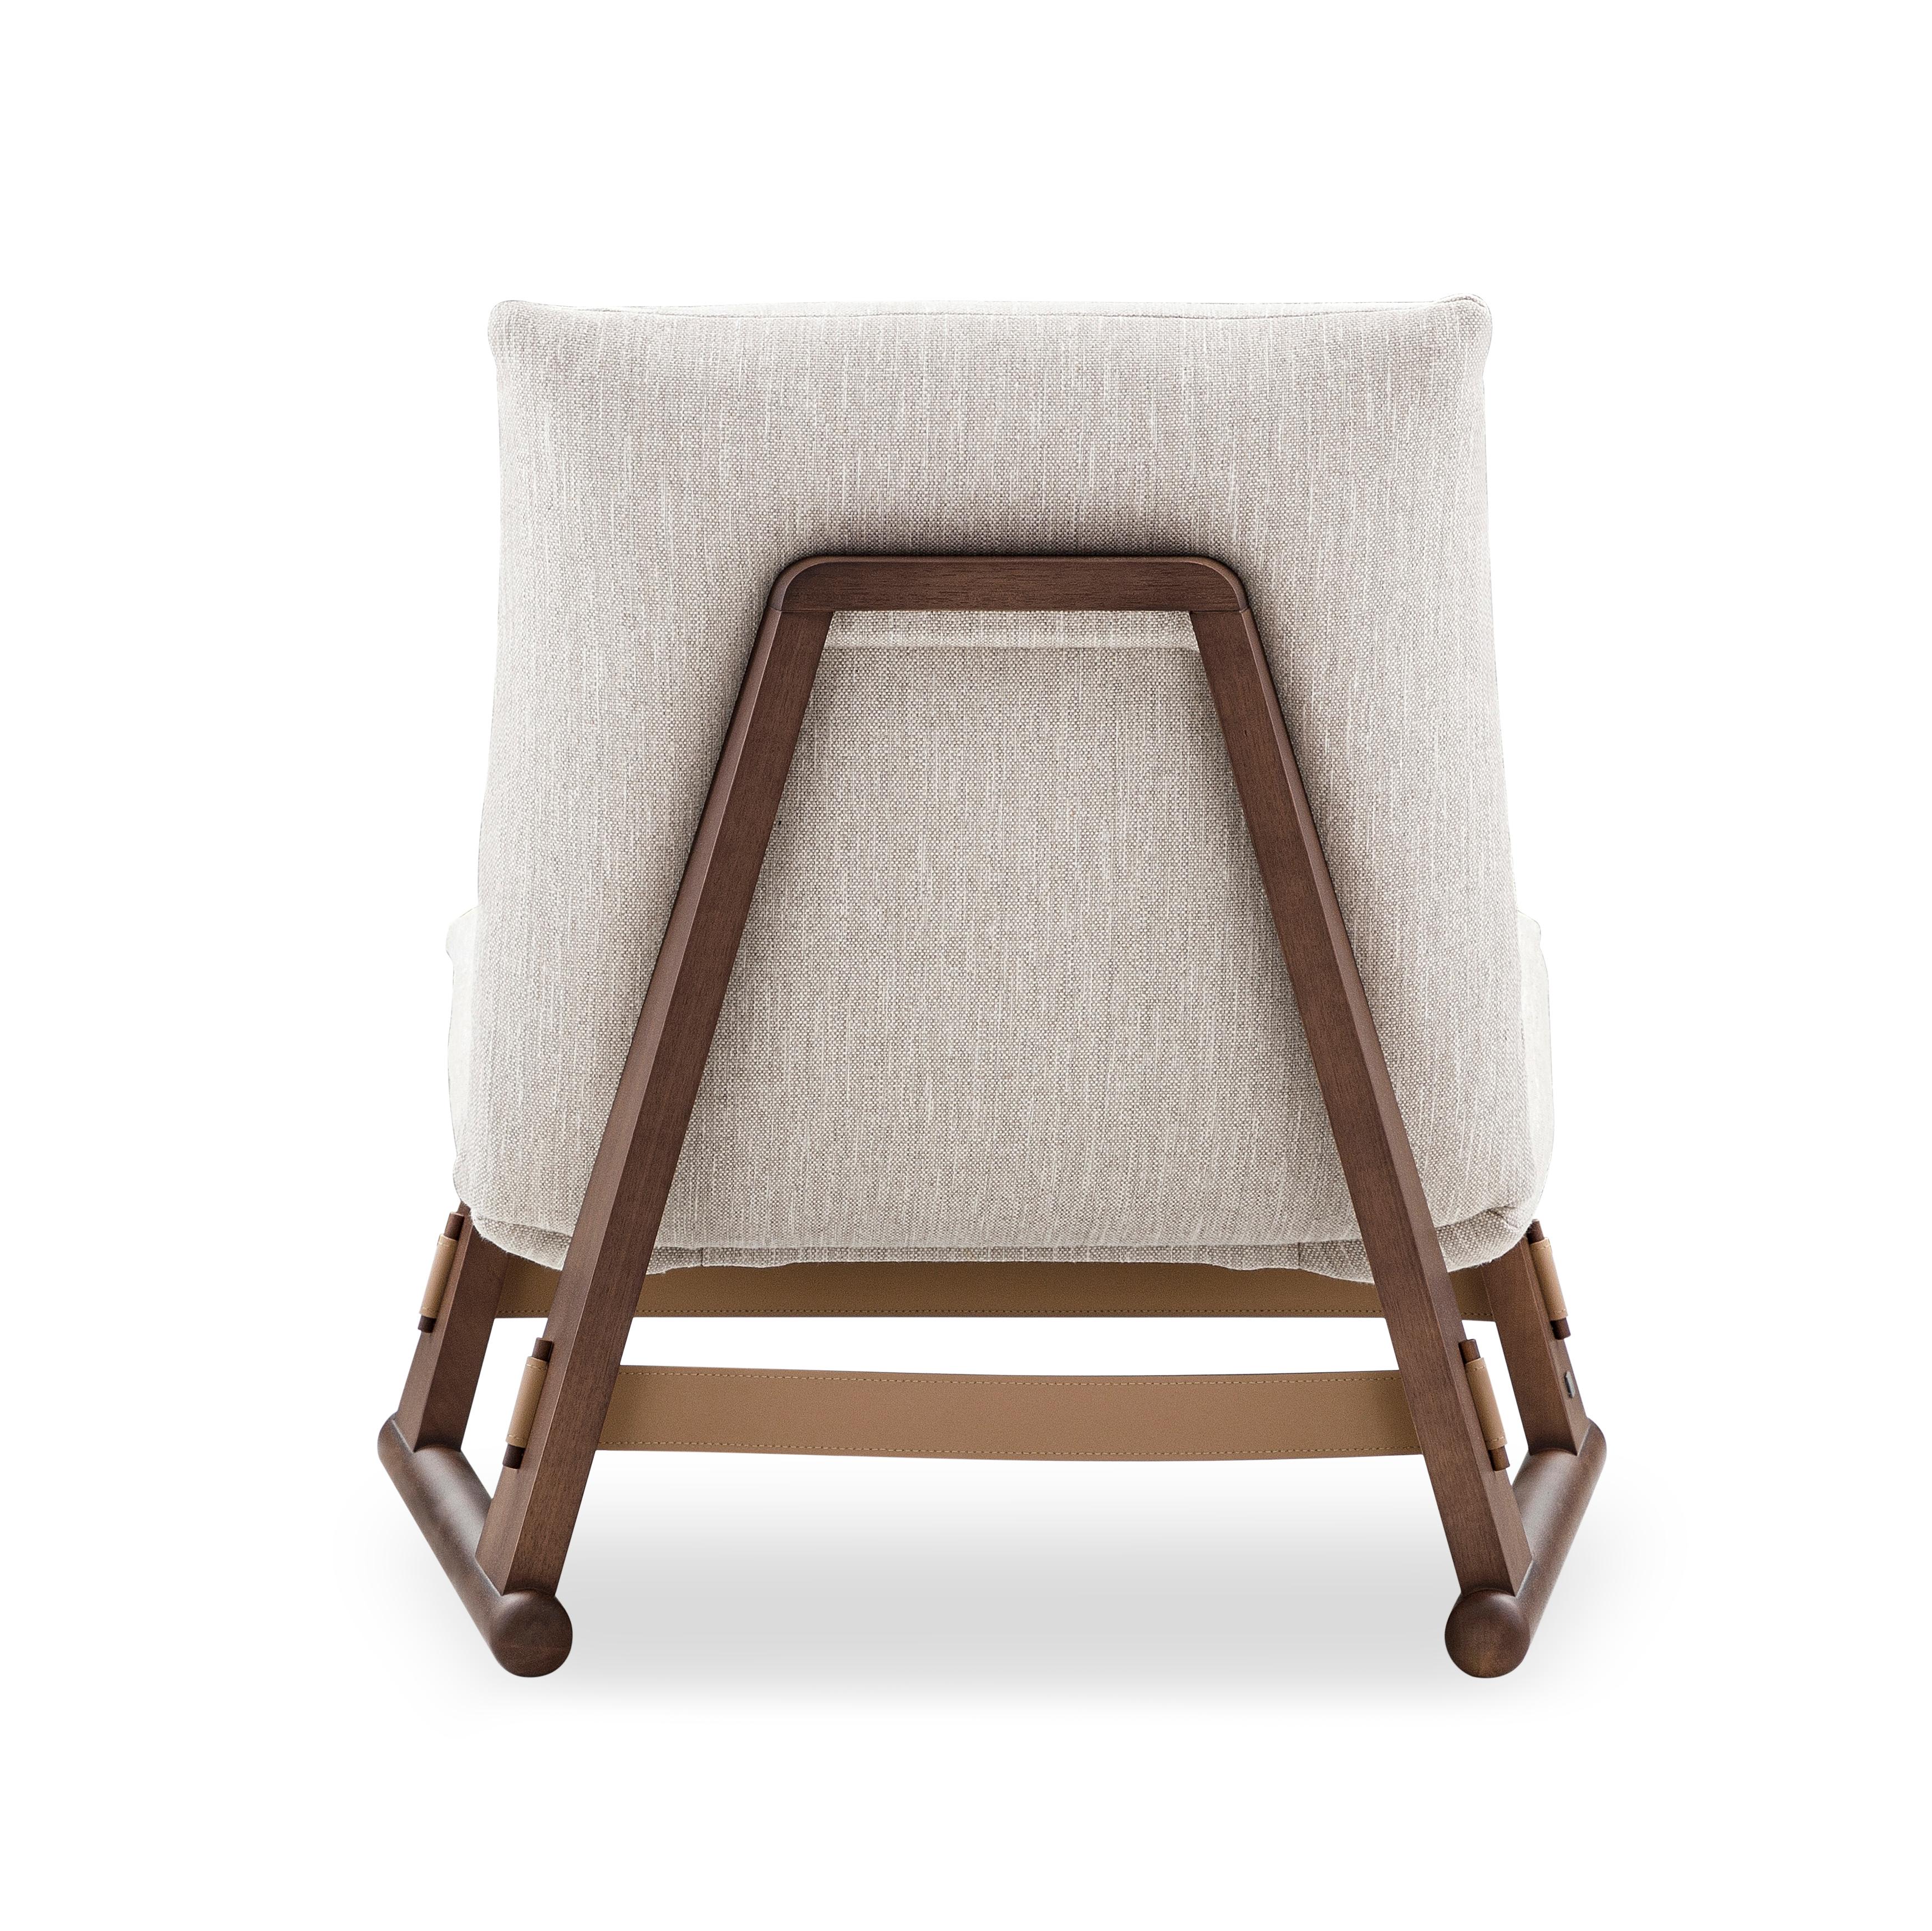 Contemporary Maia Chair in Walnut Wood Finish Frame and Off-White Fabric In New Condition For Sale In Miami, FL